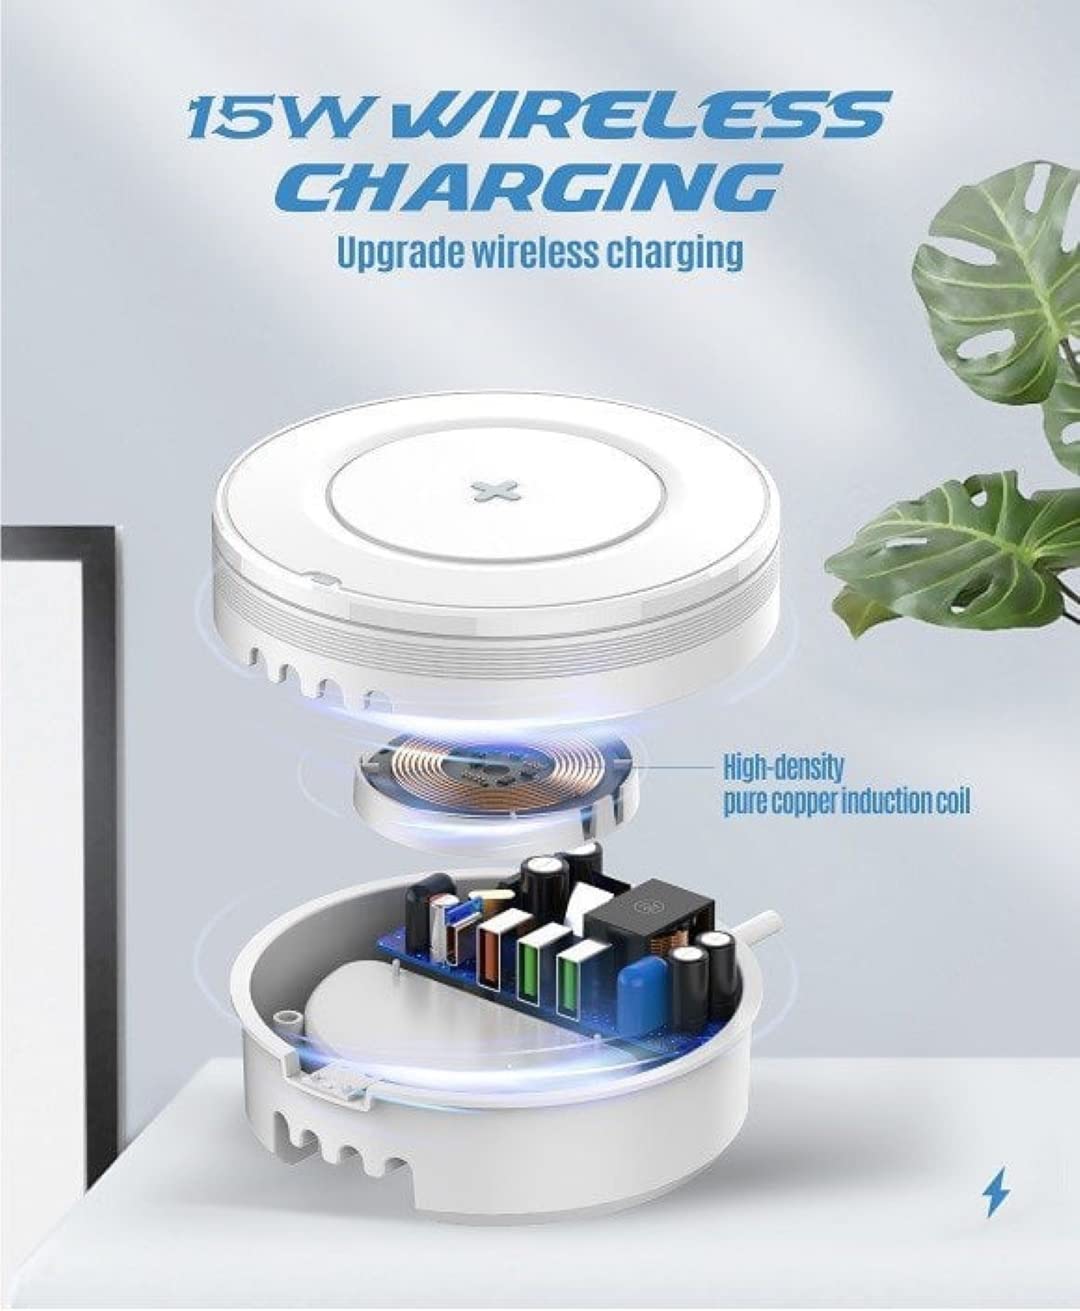 LDNIO 32W Desktop Wireless Charging Station with Fast Charging